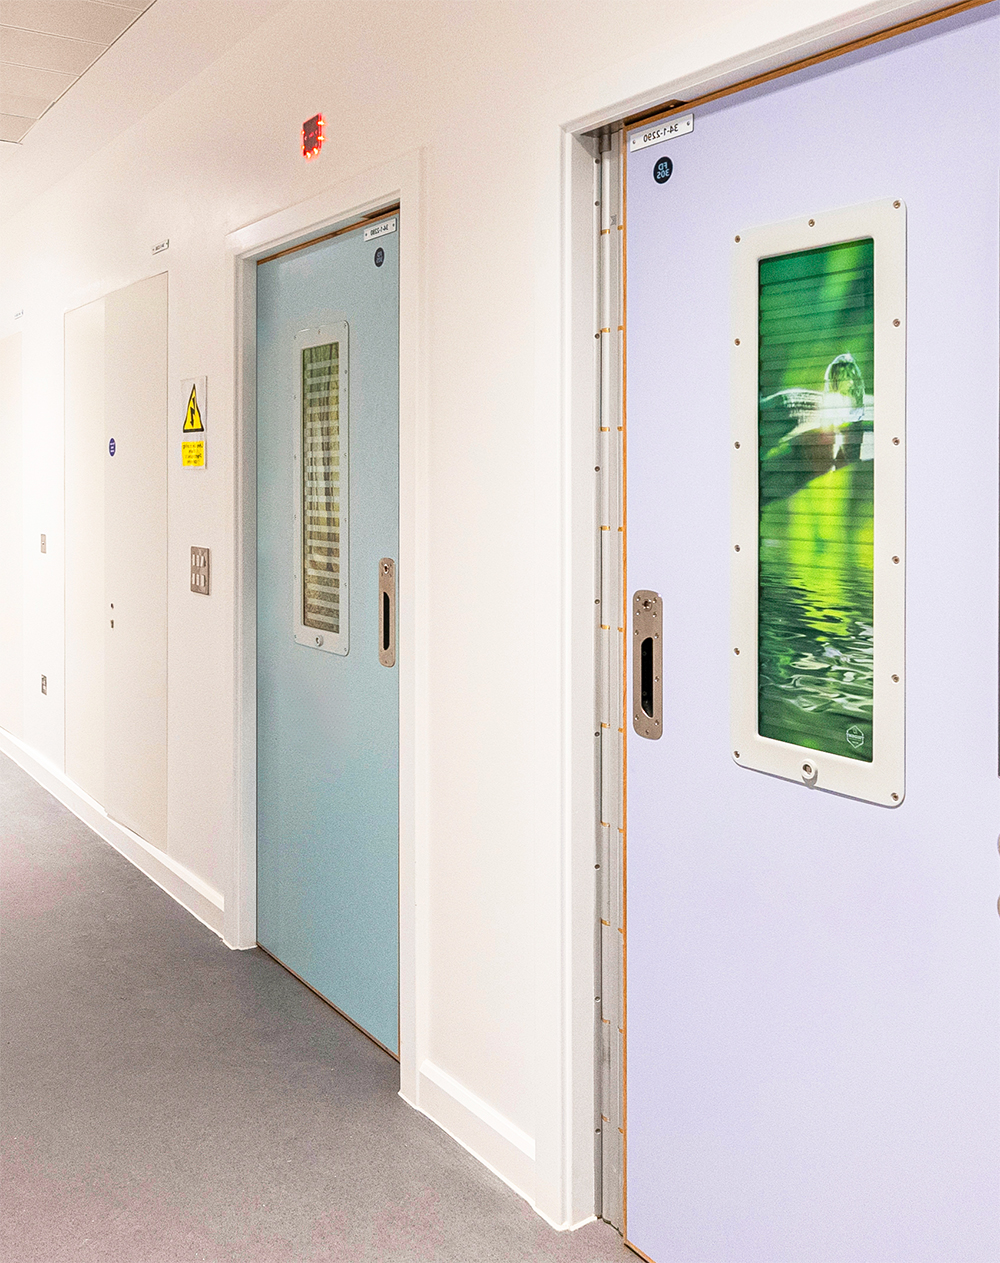 SWITCH Anti-Barricade Door System for Behavioral Health.